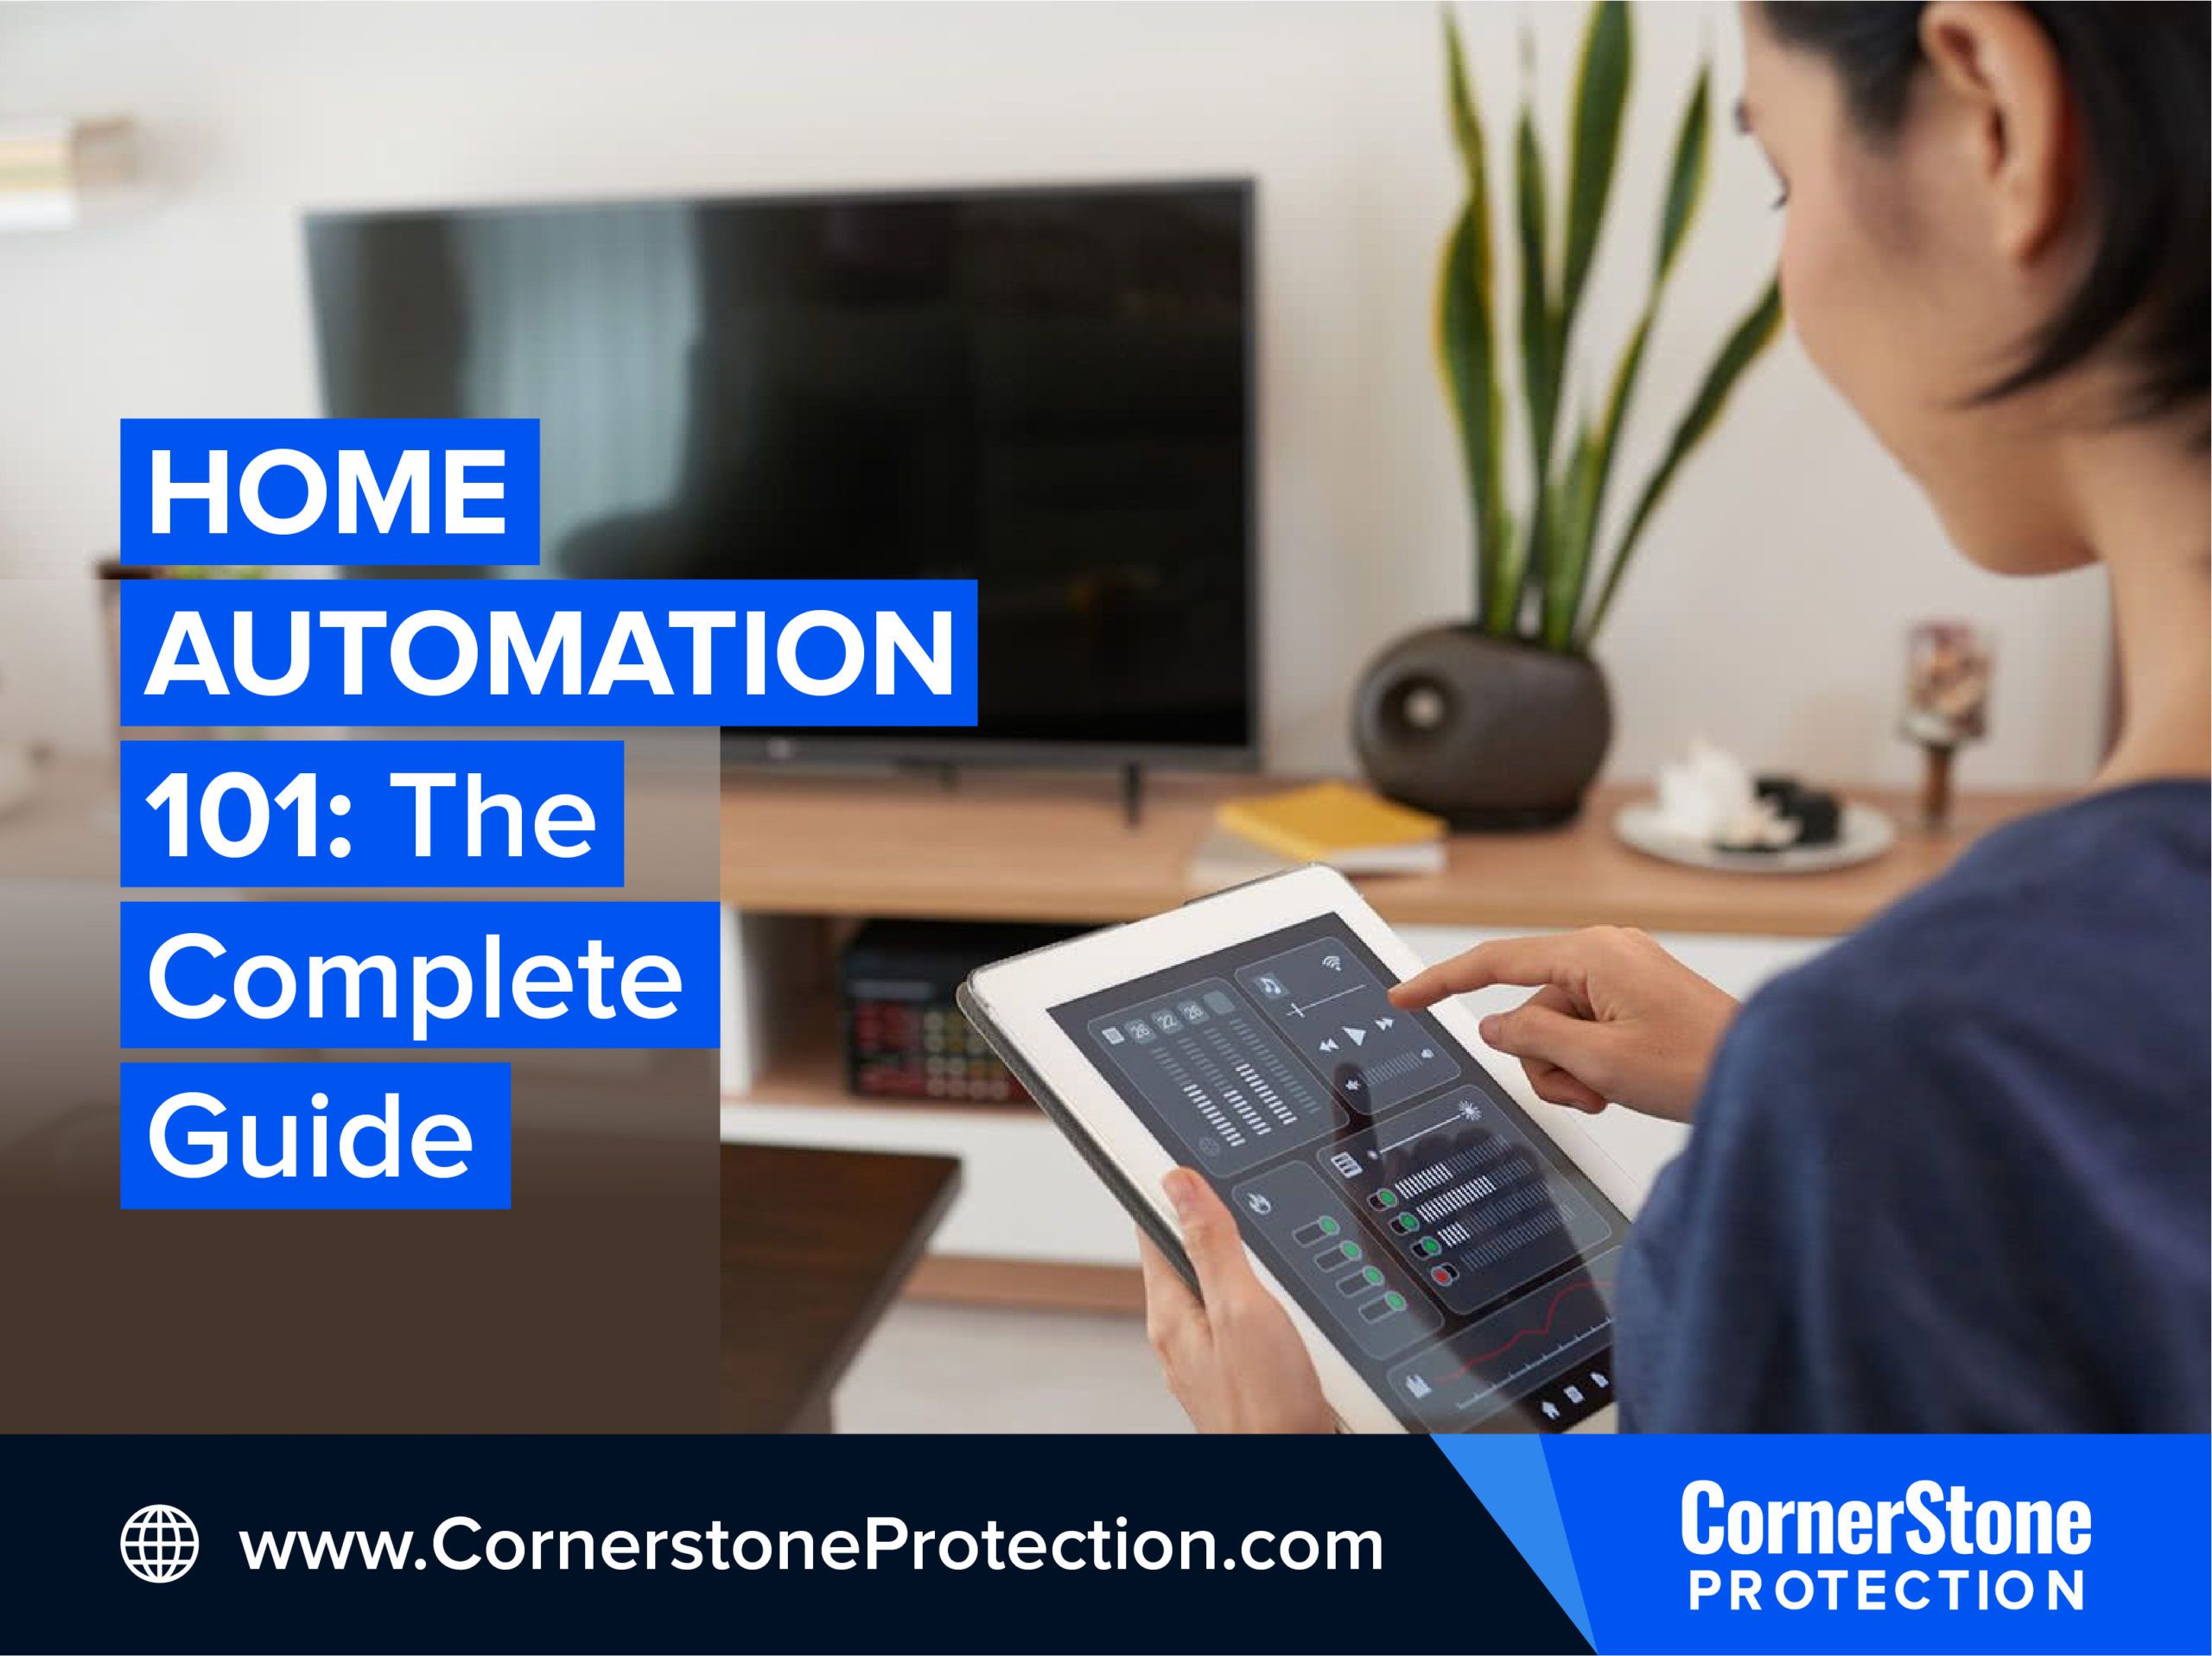 home automation 101 cornerstone protection